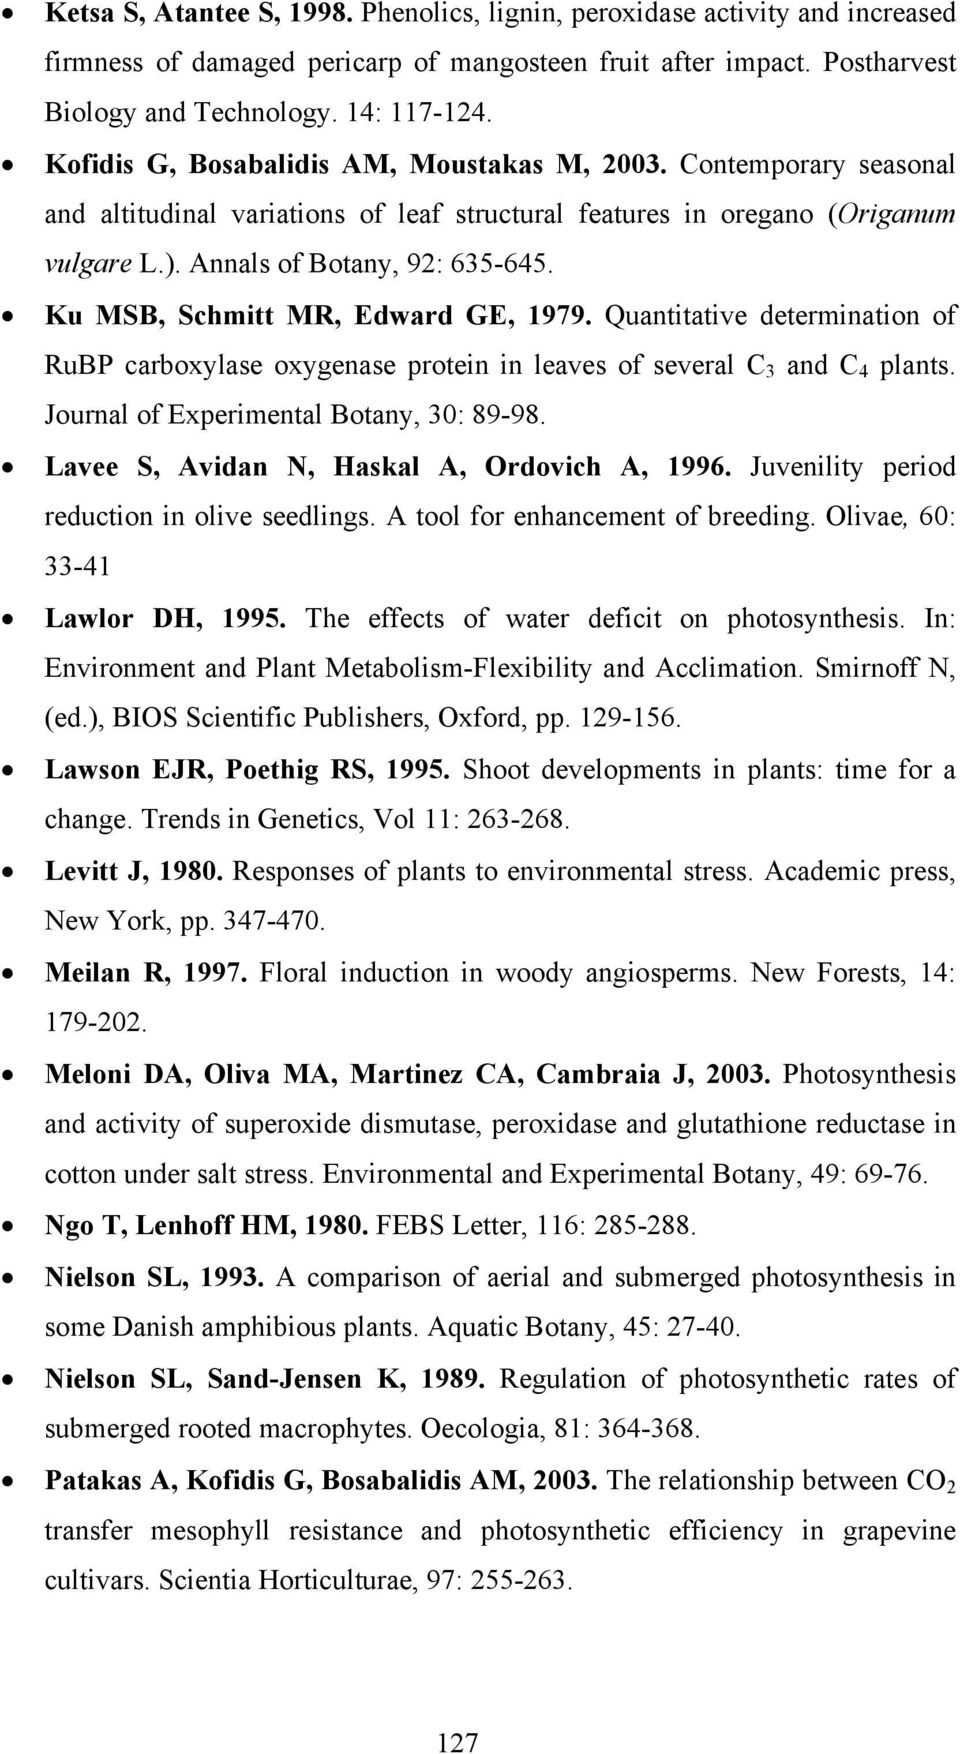 Ku MSB, Schmitt MR, Edward GE, 1979. Quantitative determination of RuBP carboxylase oxygenase protein in leaves of several C 3 and C 4 plants. Journal of Experimental Botany, 30: 89-98.